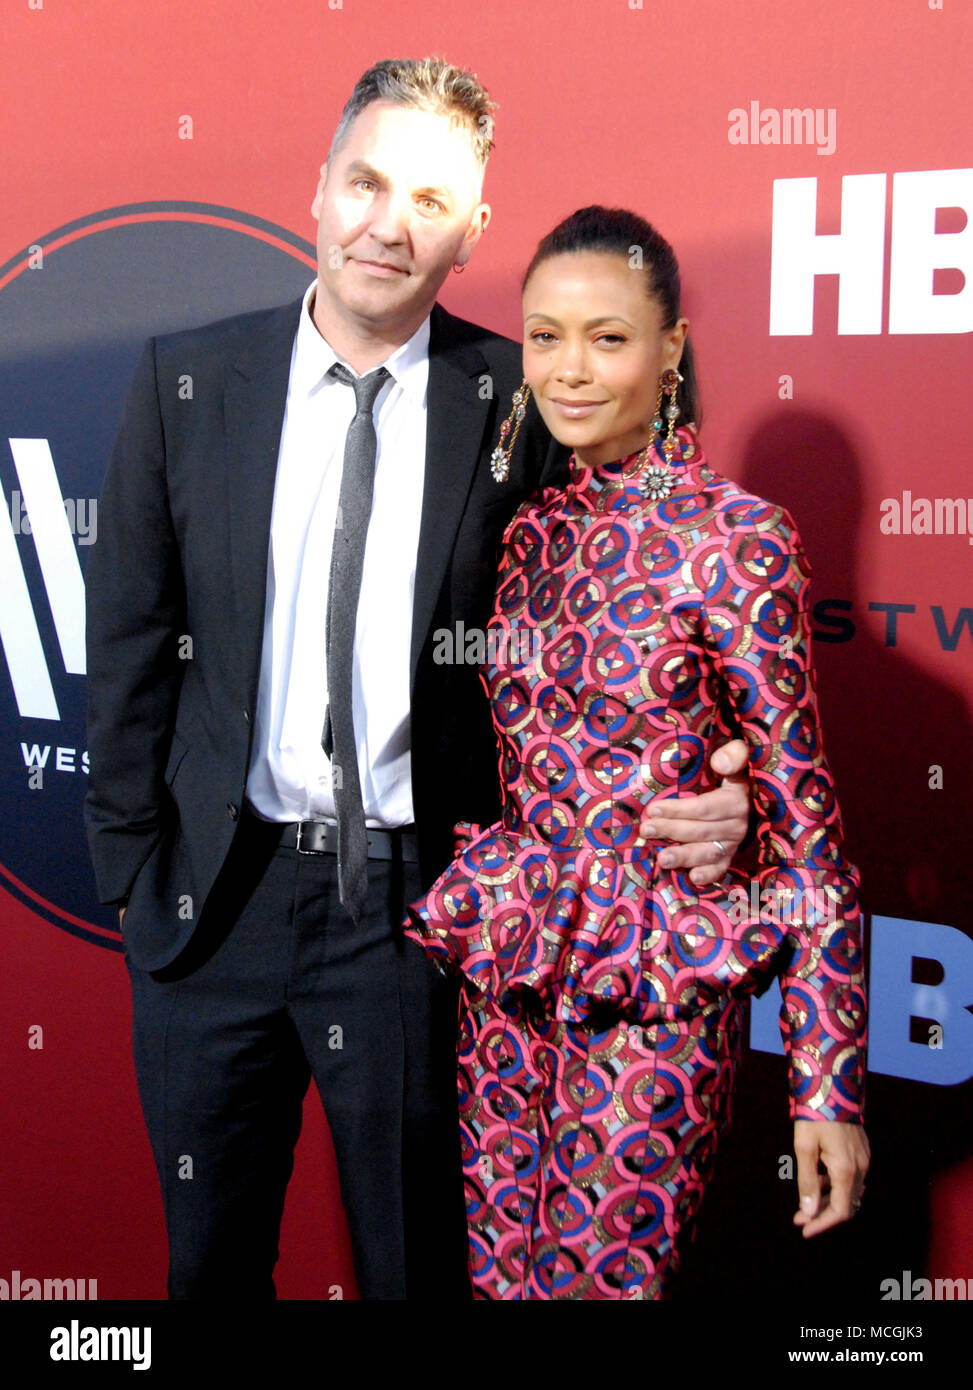 LOS ANGELES, CA - APRIL 16: (L-R) Ol Parker and Actress Thandie Newton attend the Los Angeles Season 2 Premiere of HBO Drama Series 'Westworld' at The Cinerama Dome on April 16, 2018 in Los Angeles, California. Photo by Barry King/Alamy Live News Stock Photo